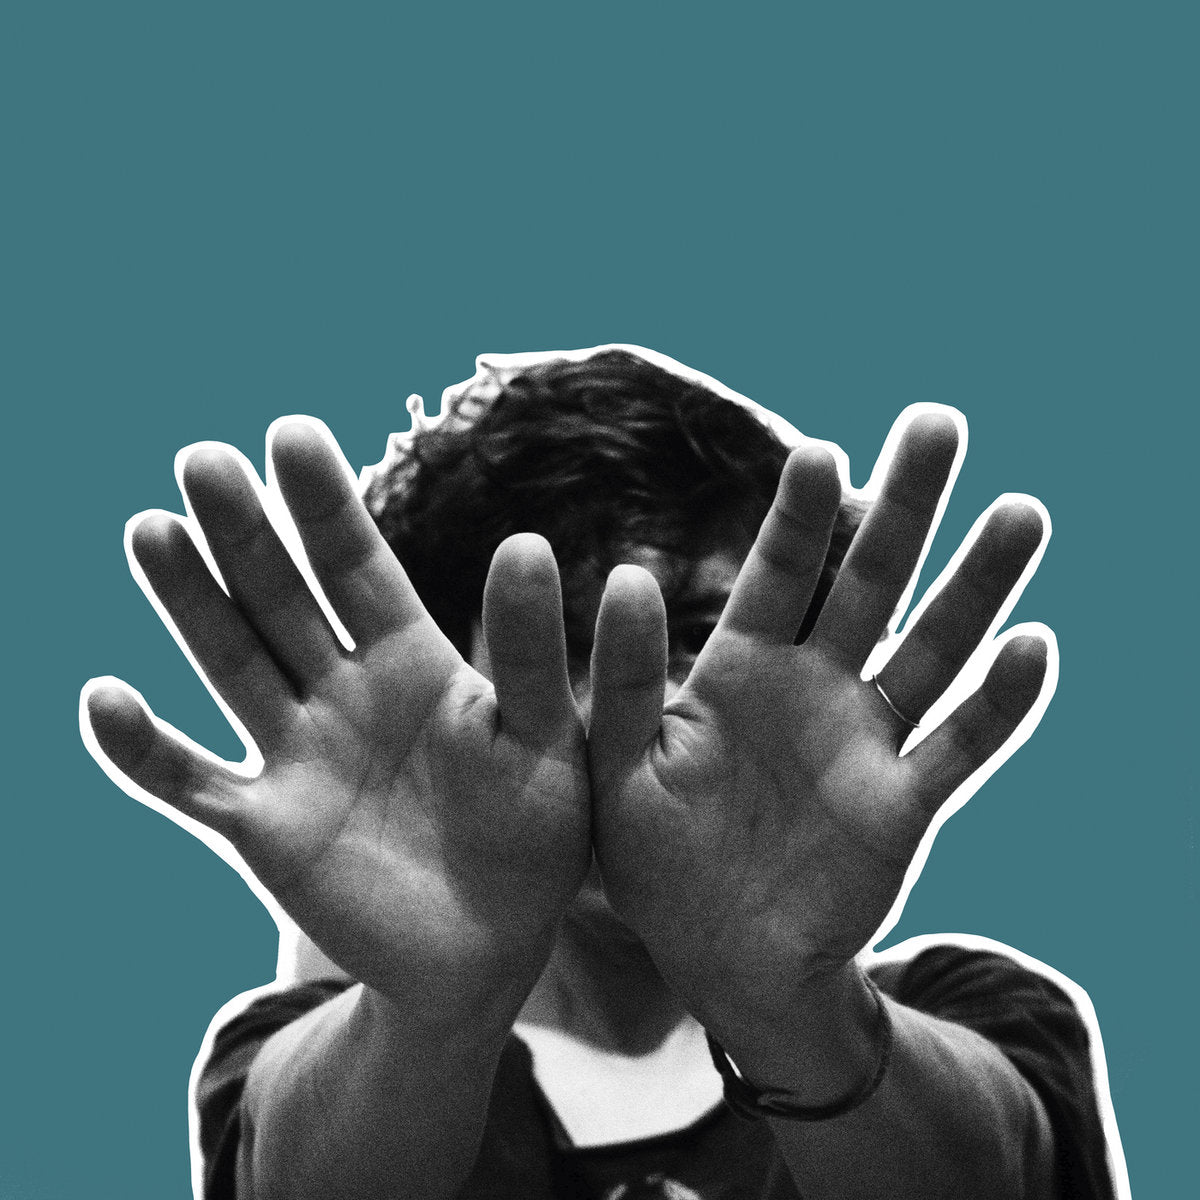 TUNE-YARDS - I CAN FEEL YOU CREEP INTO MY PRIVATE LIFE Vinyl LP